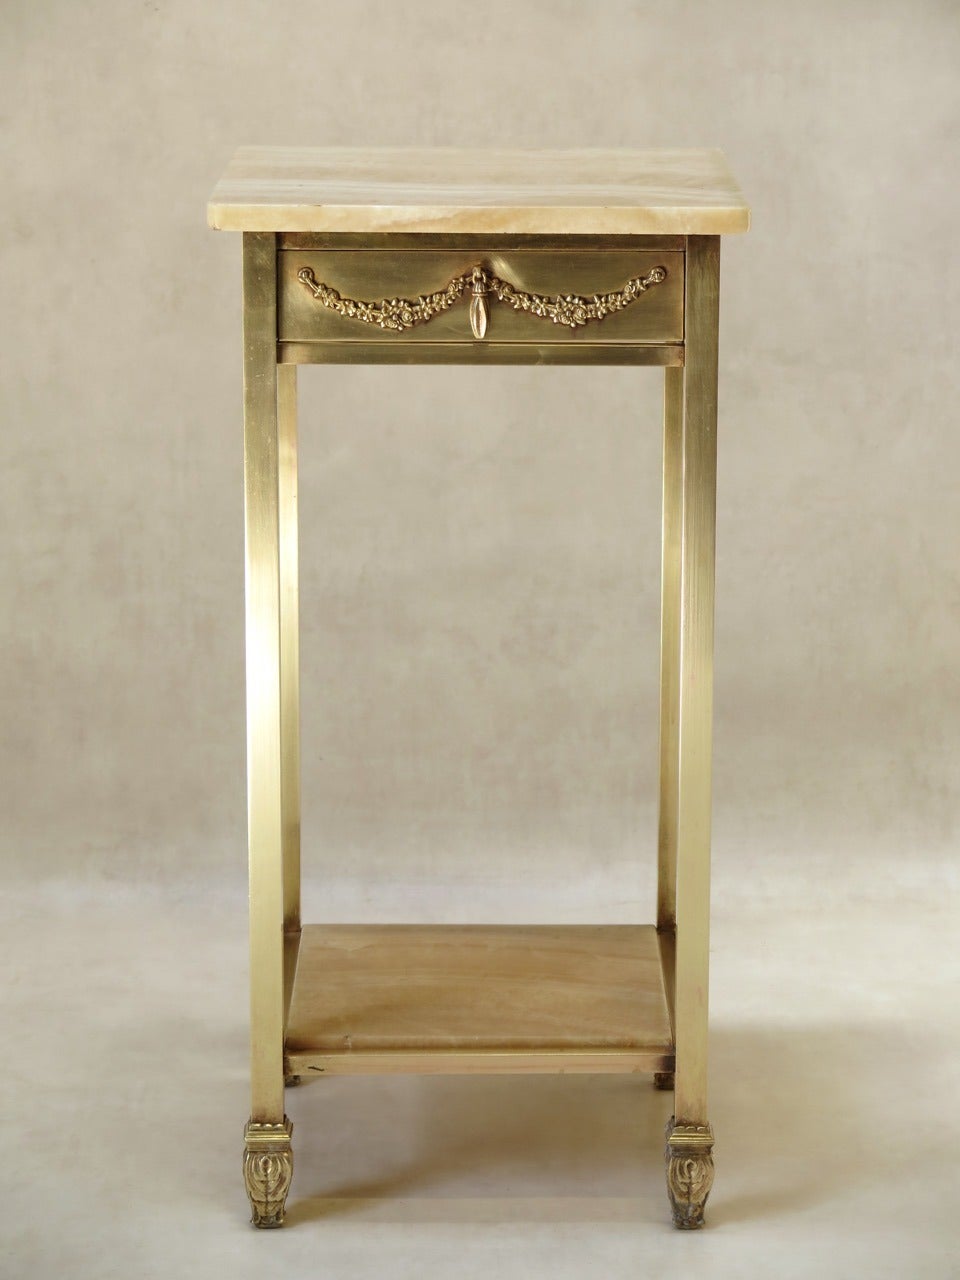 Chic night stand, with a solid brass structure and an onyx top and lower shelf. The drawer is embellished with a simple flower wreath. Lovely acanthus leaf feet. Heavy and well-made.